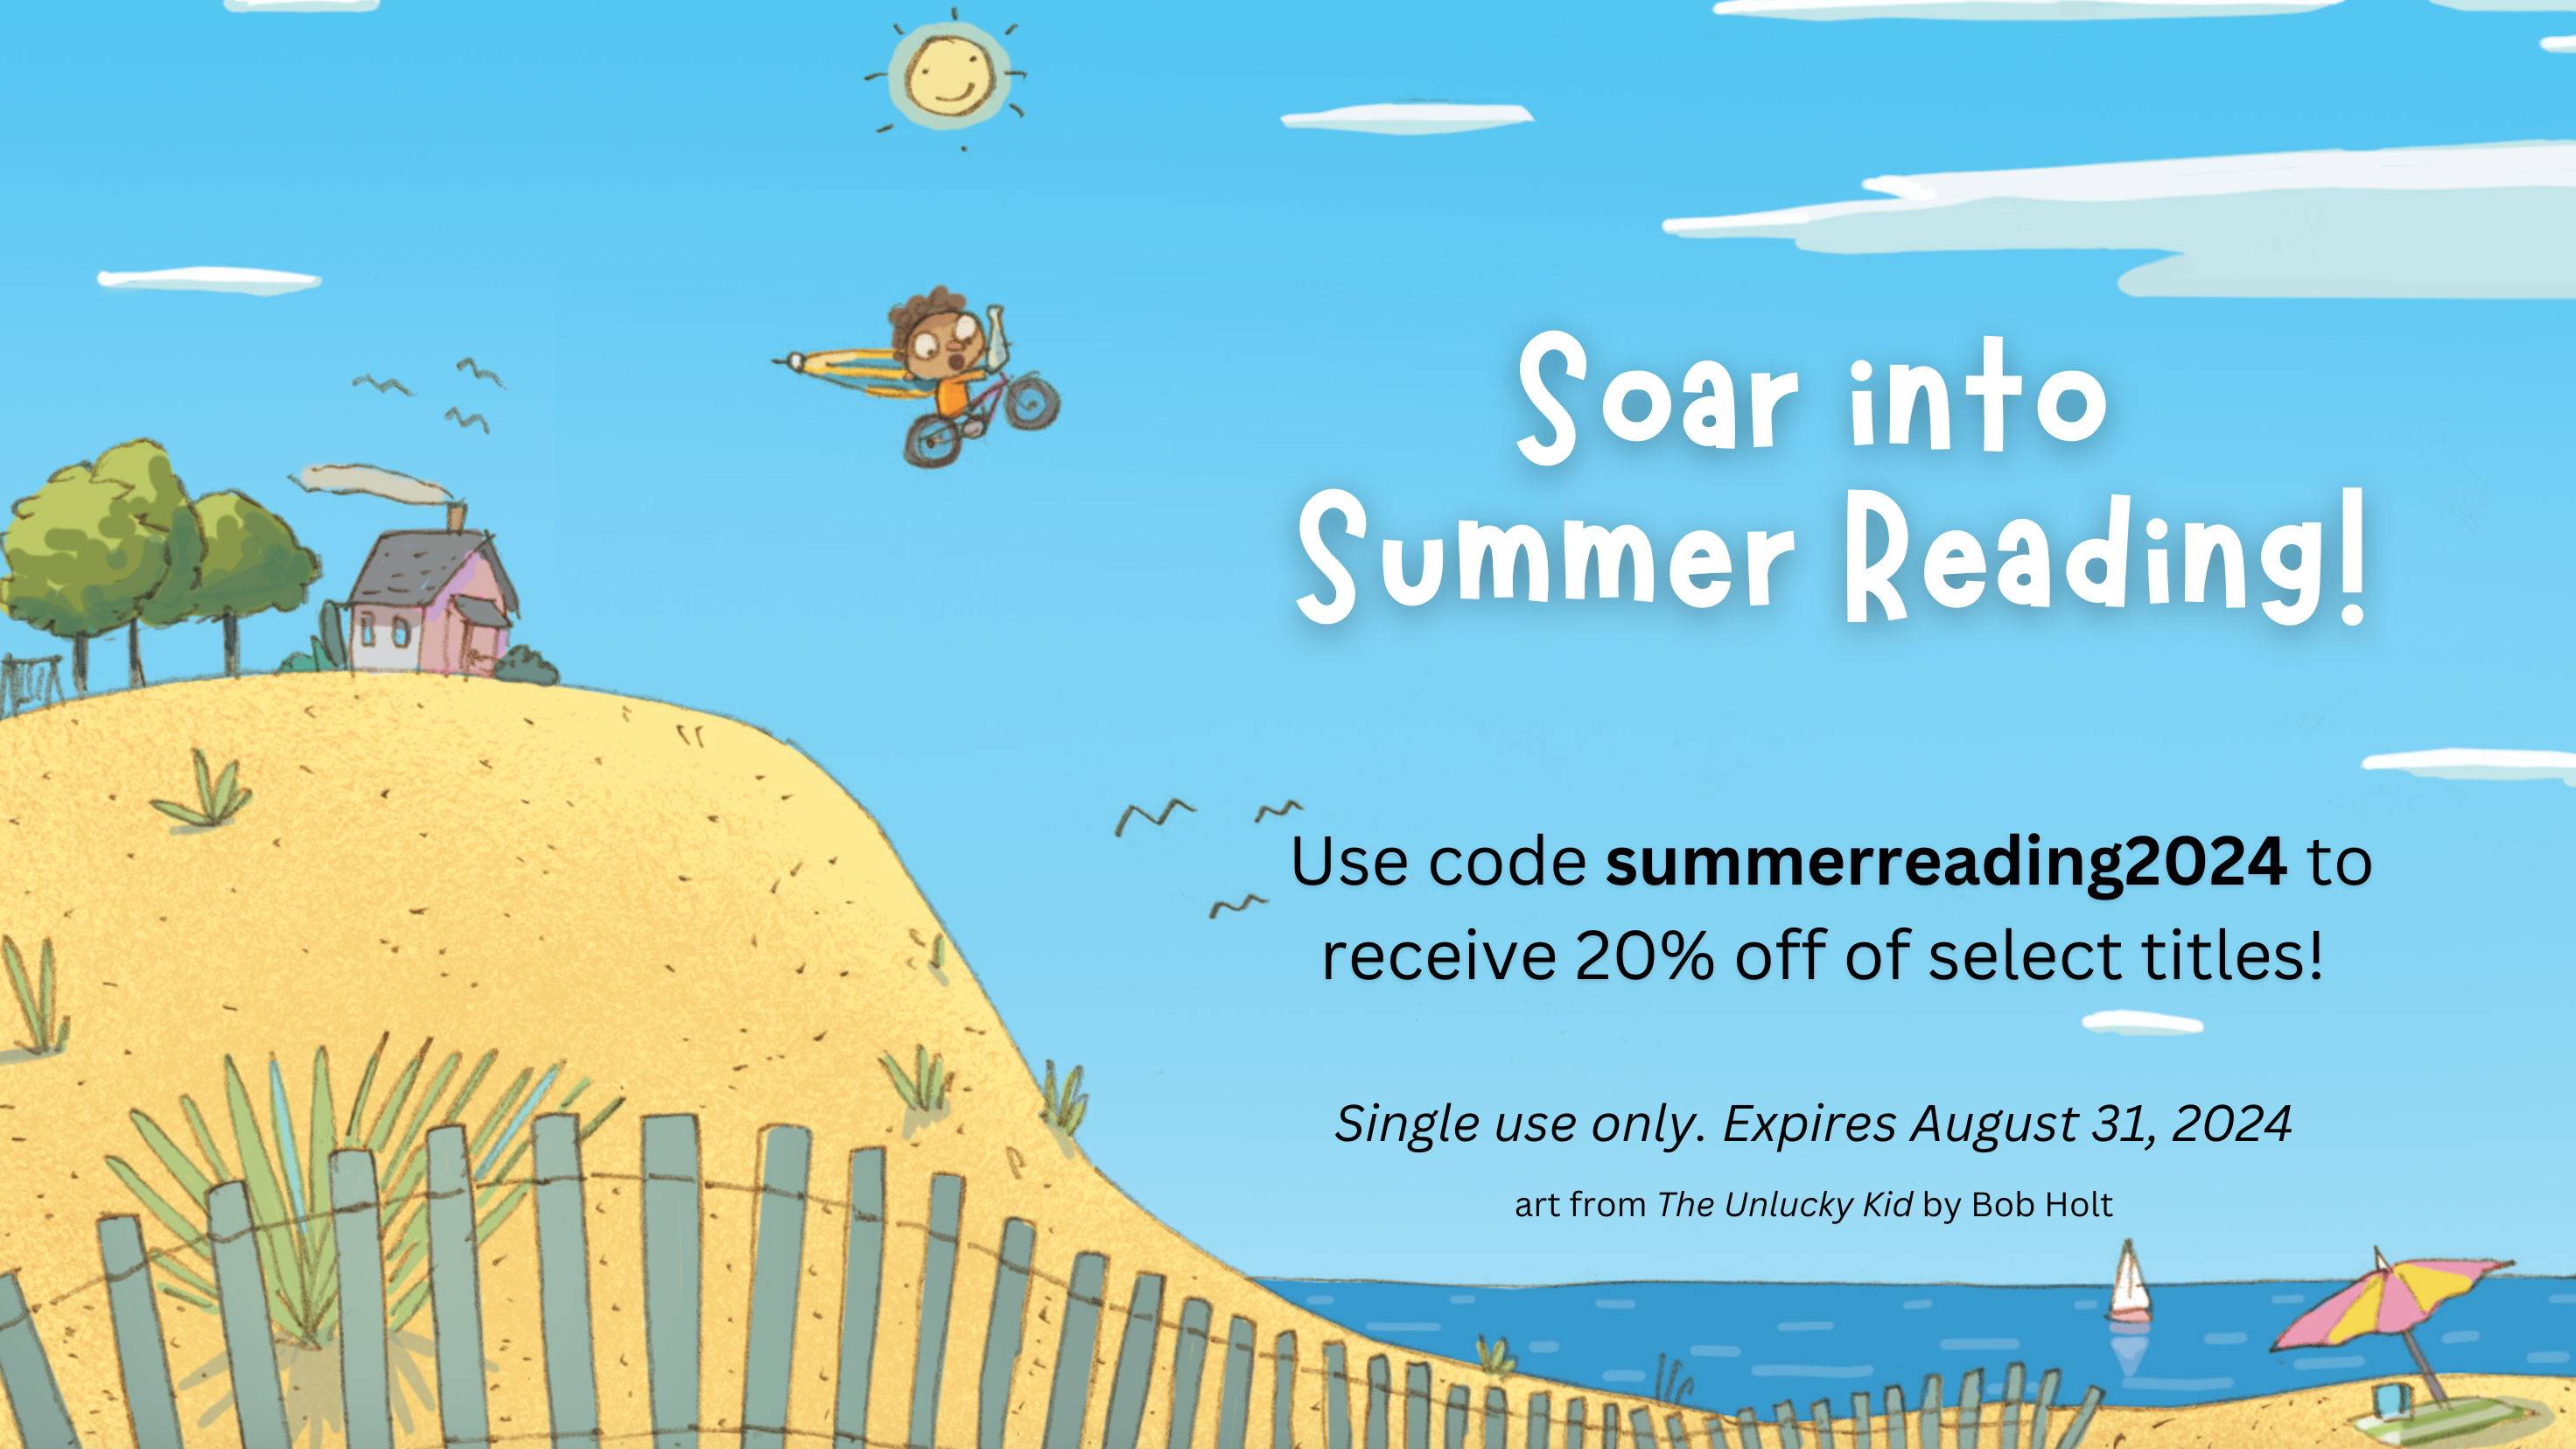 Soar into Summer Reading! Use code summerreading2024 to receive 20% off of select titles! Single use only. Expires August 31, 2024. 